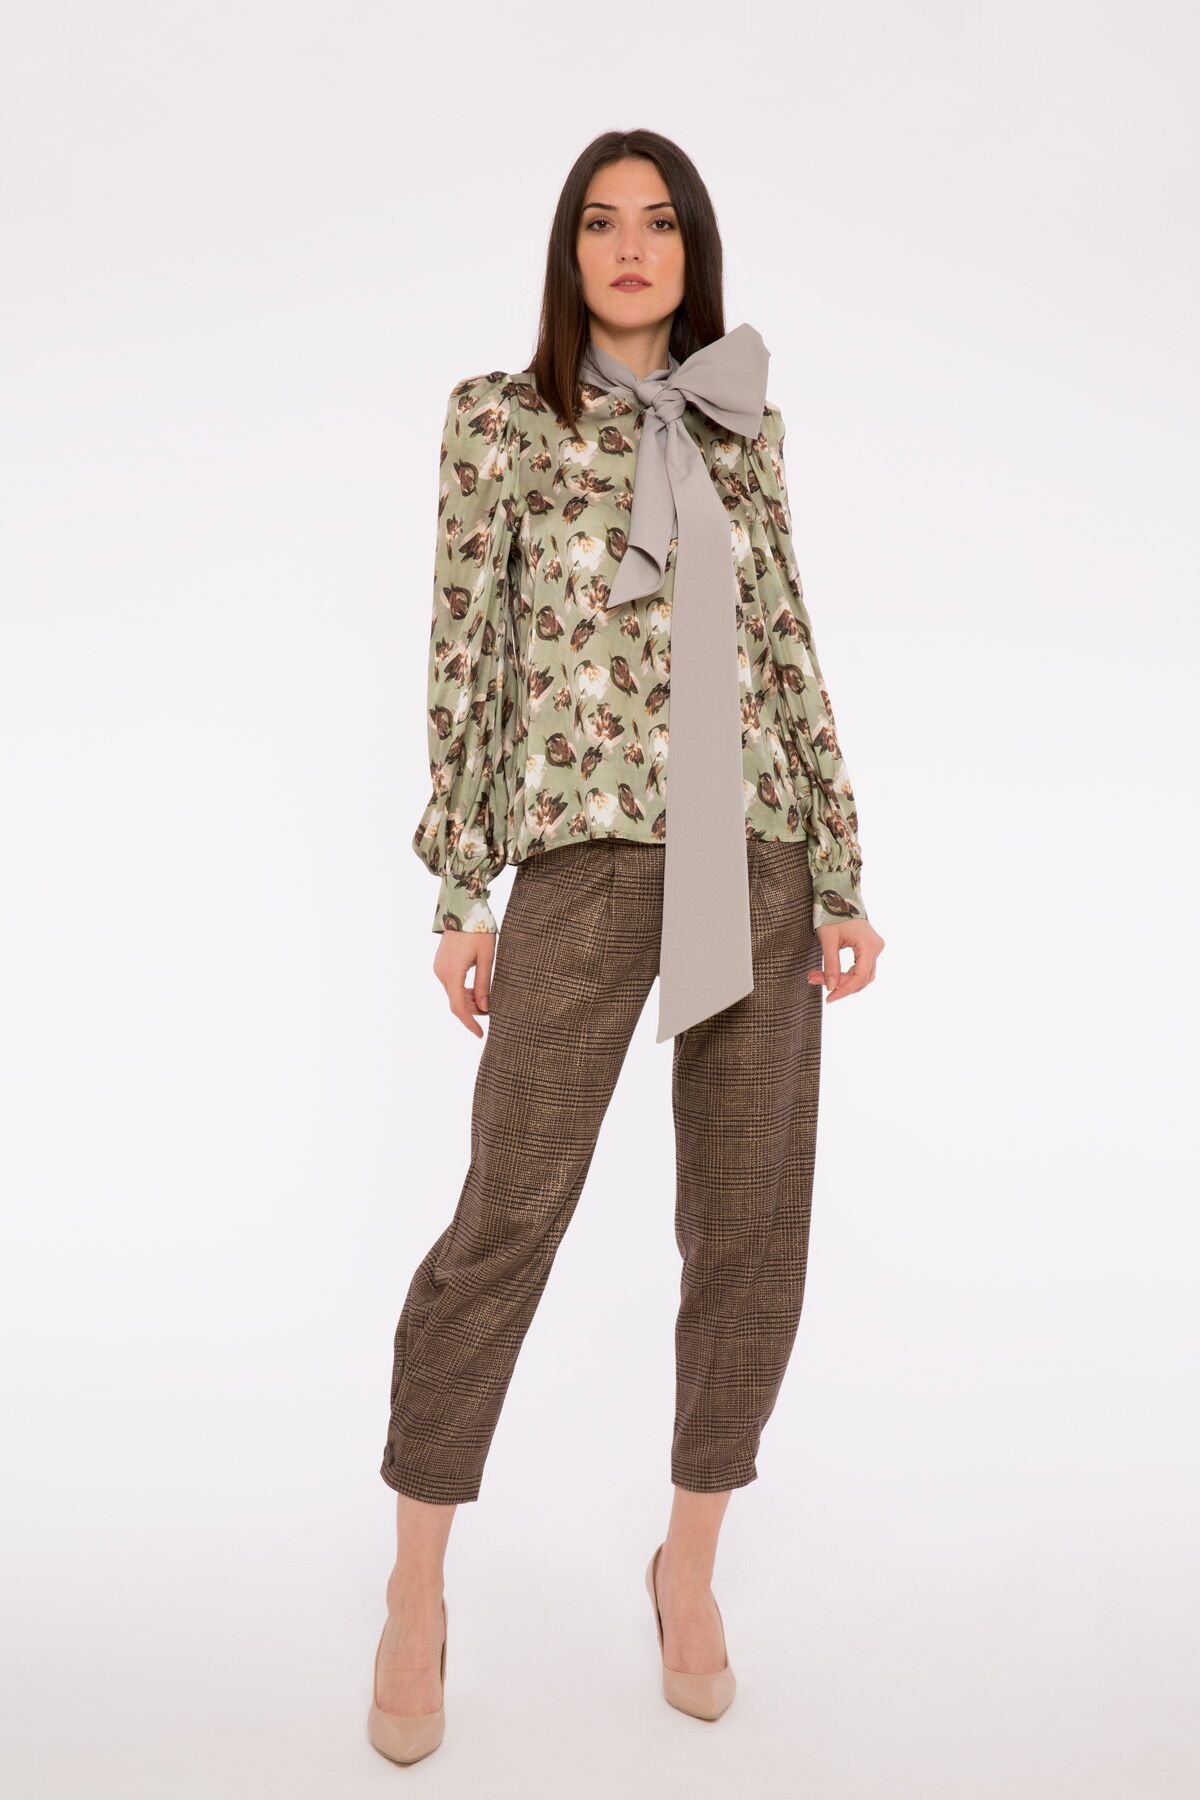 Contrast Detailed Stand Up Collar Floral Pattern Flowy Green Blouse